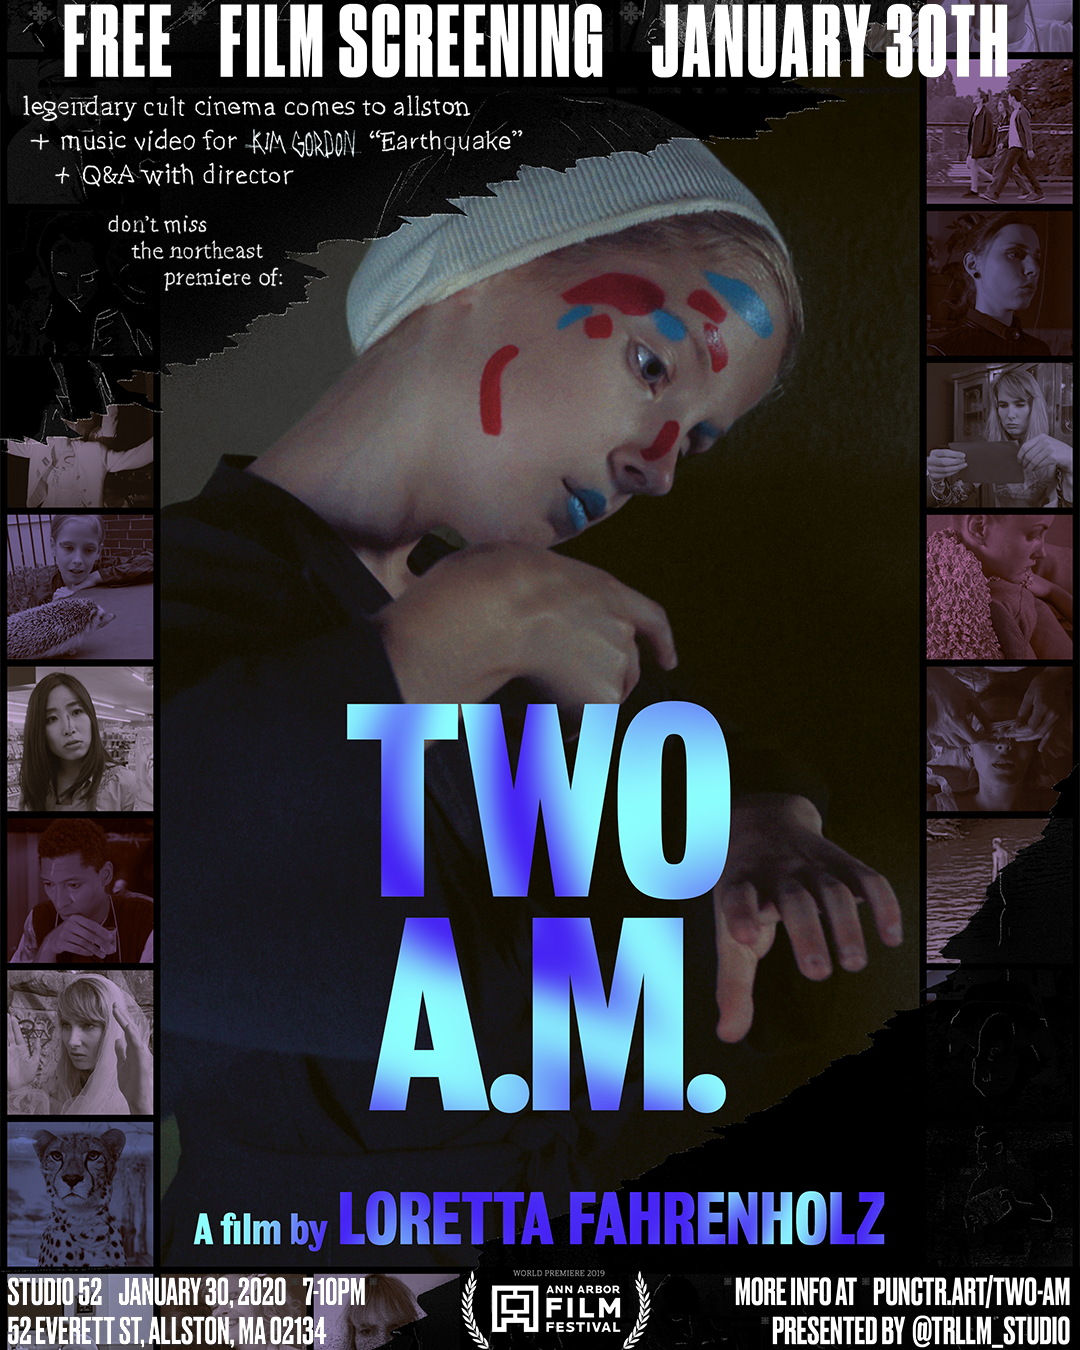 *FREE* SCREENING OF "TWO A.M." BY LORETTA FAHRENHOLZ ON JANUARY 30TH AT STUDIO 52 ALLSTON